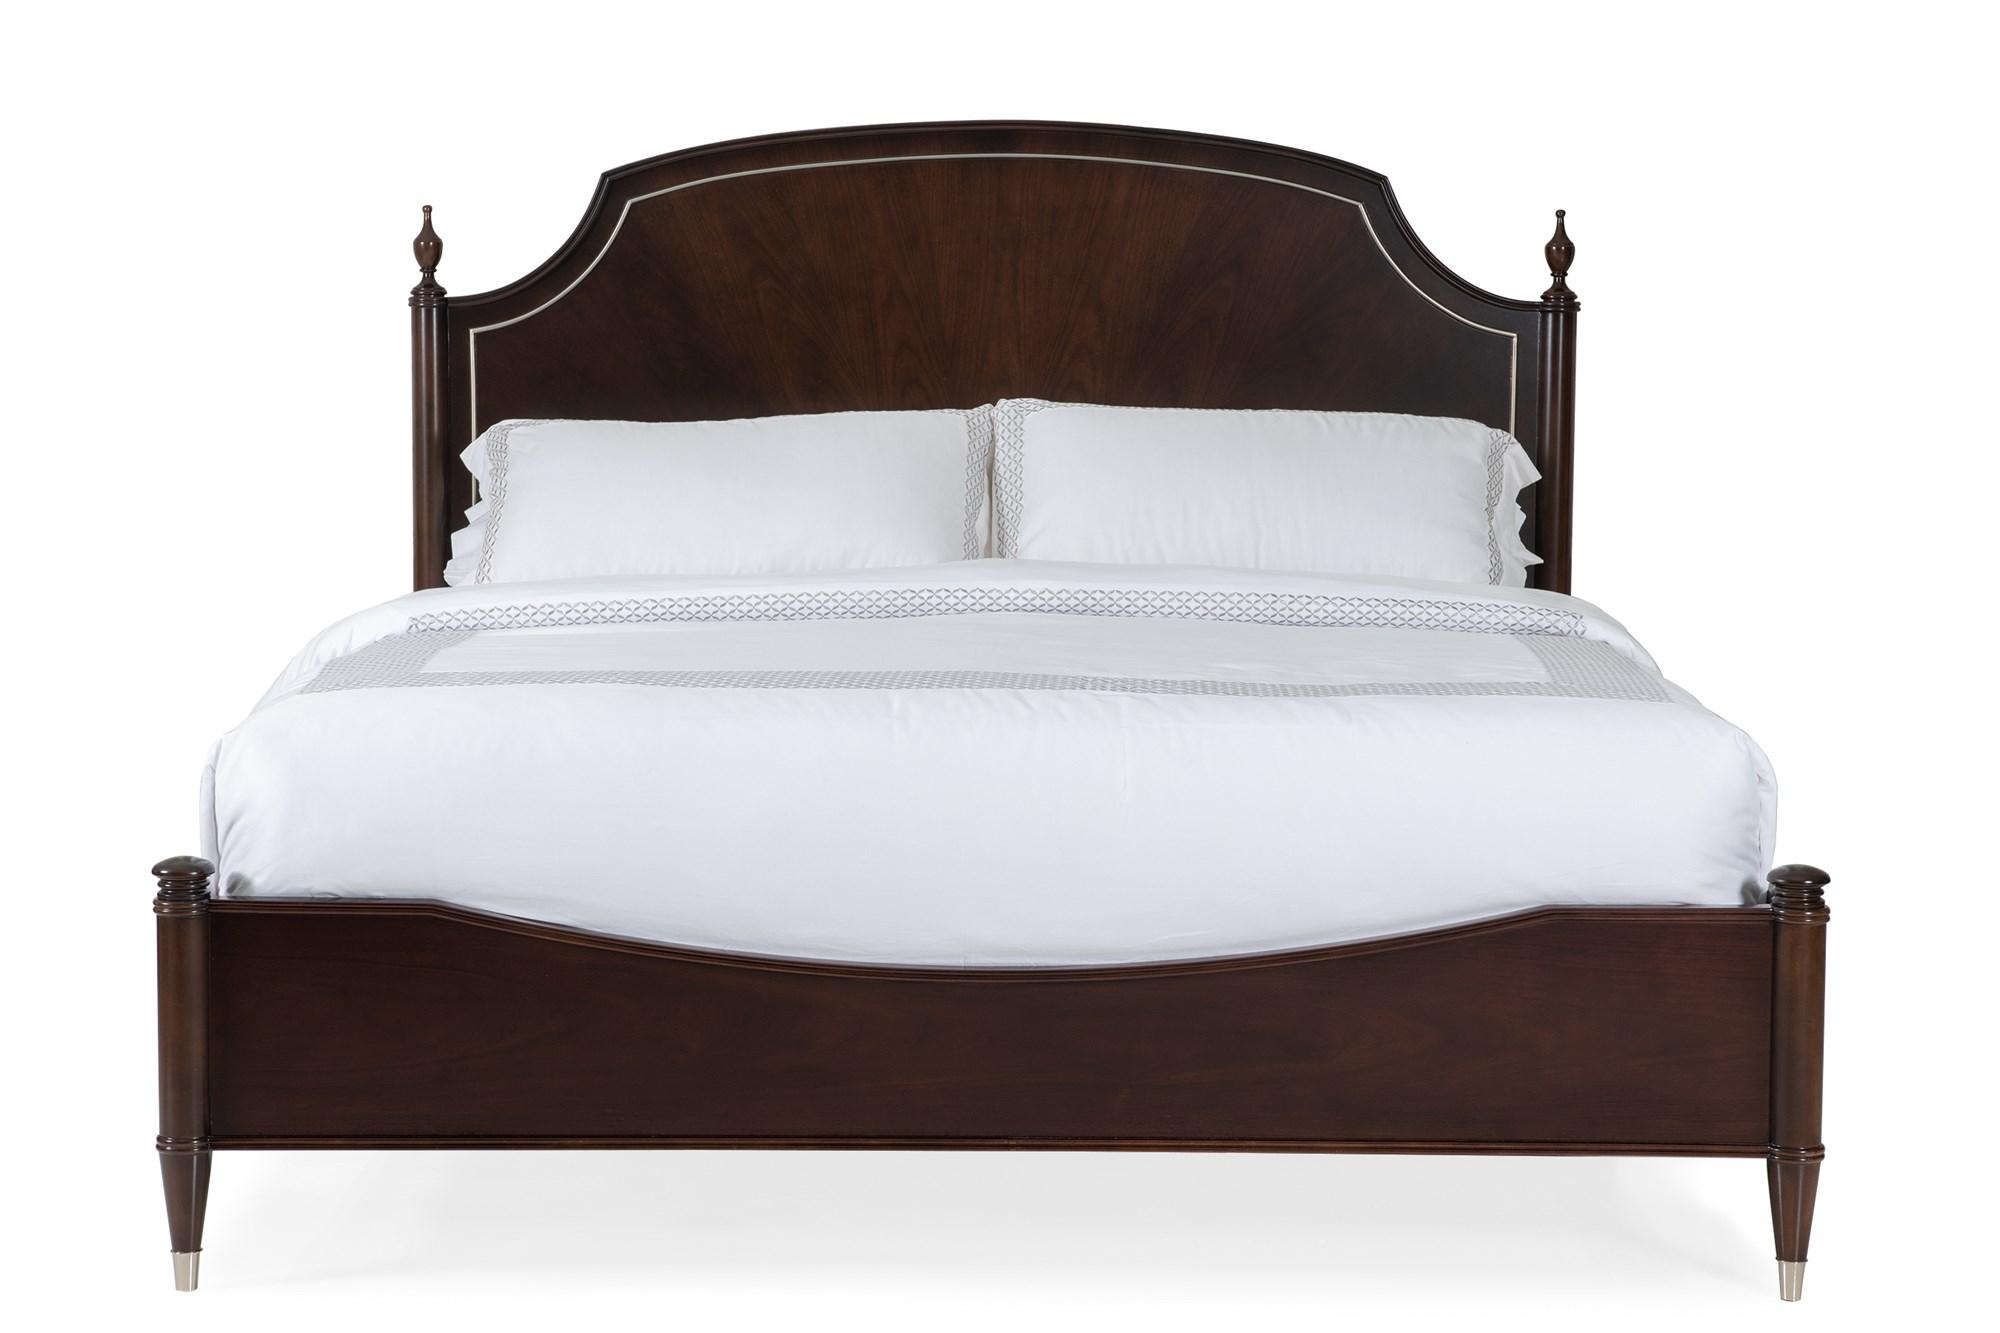 

    
Mocha Walnut & Soft Silver Paint Finish Queen Bed SUITE DREAMS by Caracole
